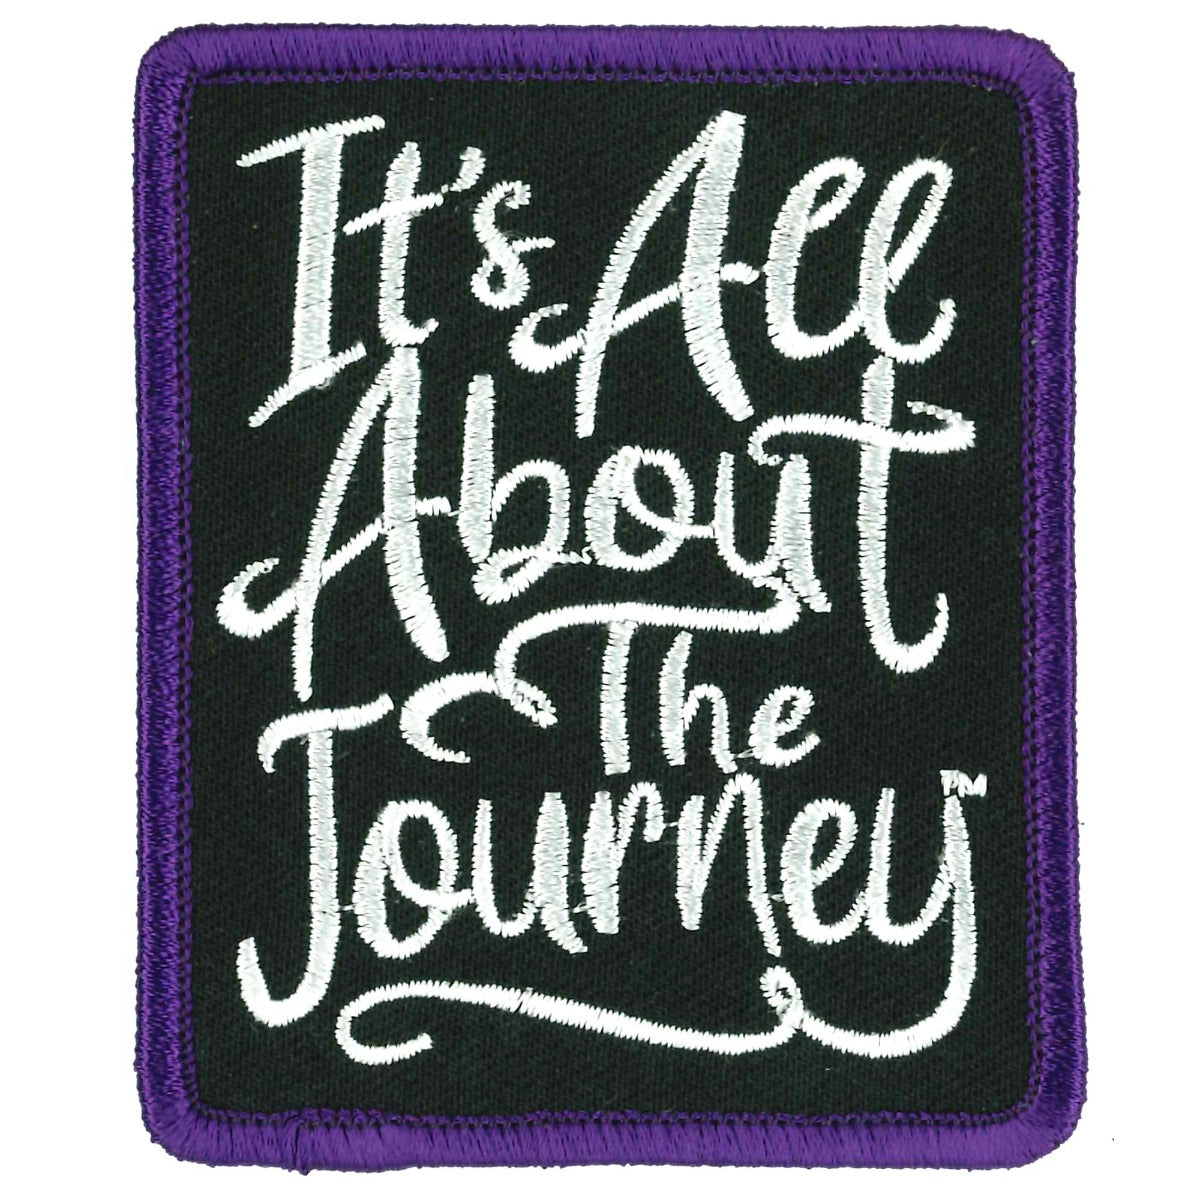 Hot Leathers 3" It's All About the Journey Patch